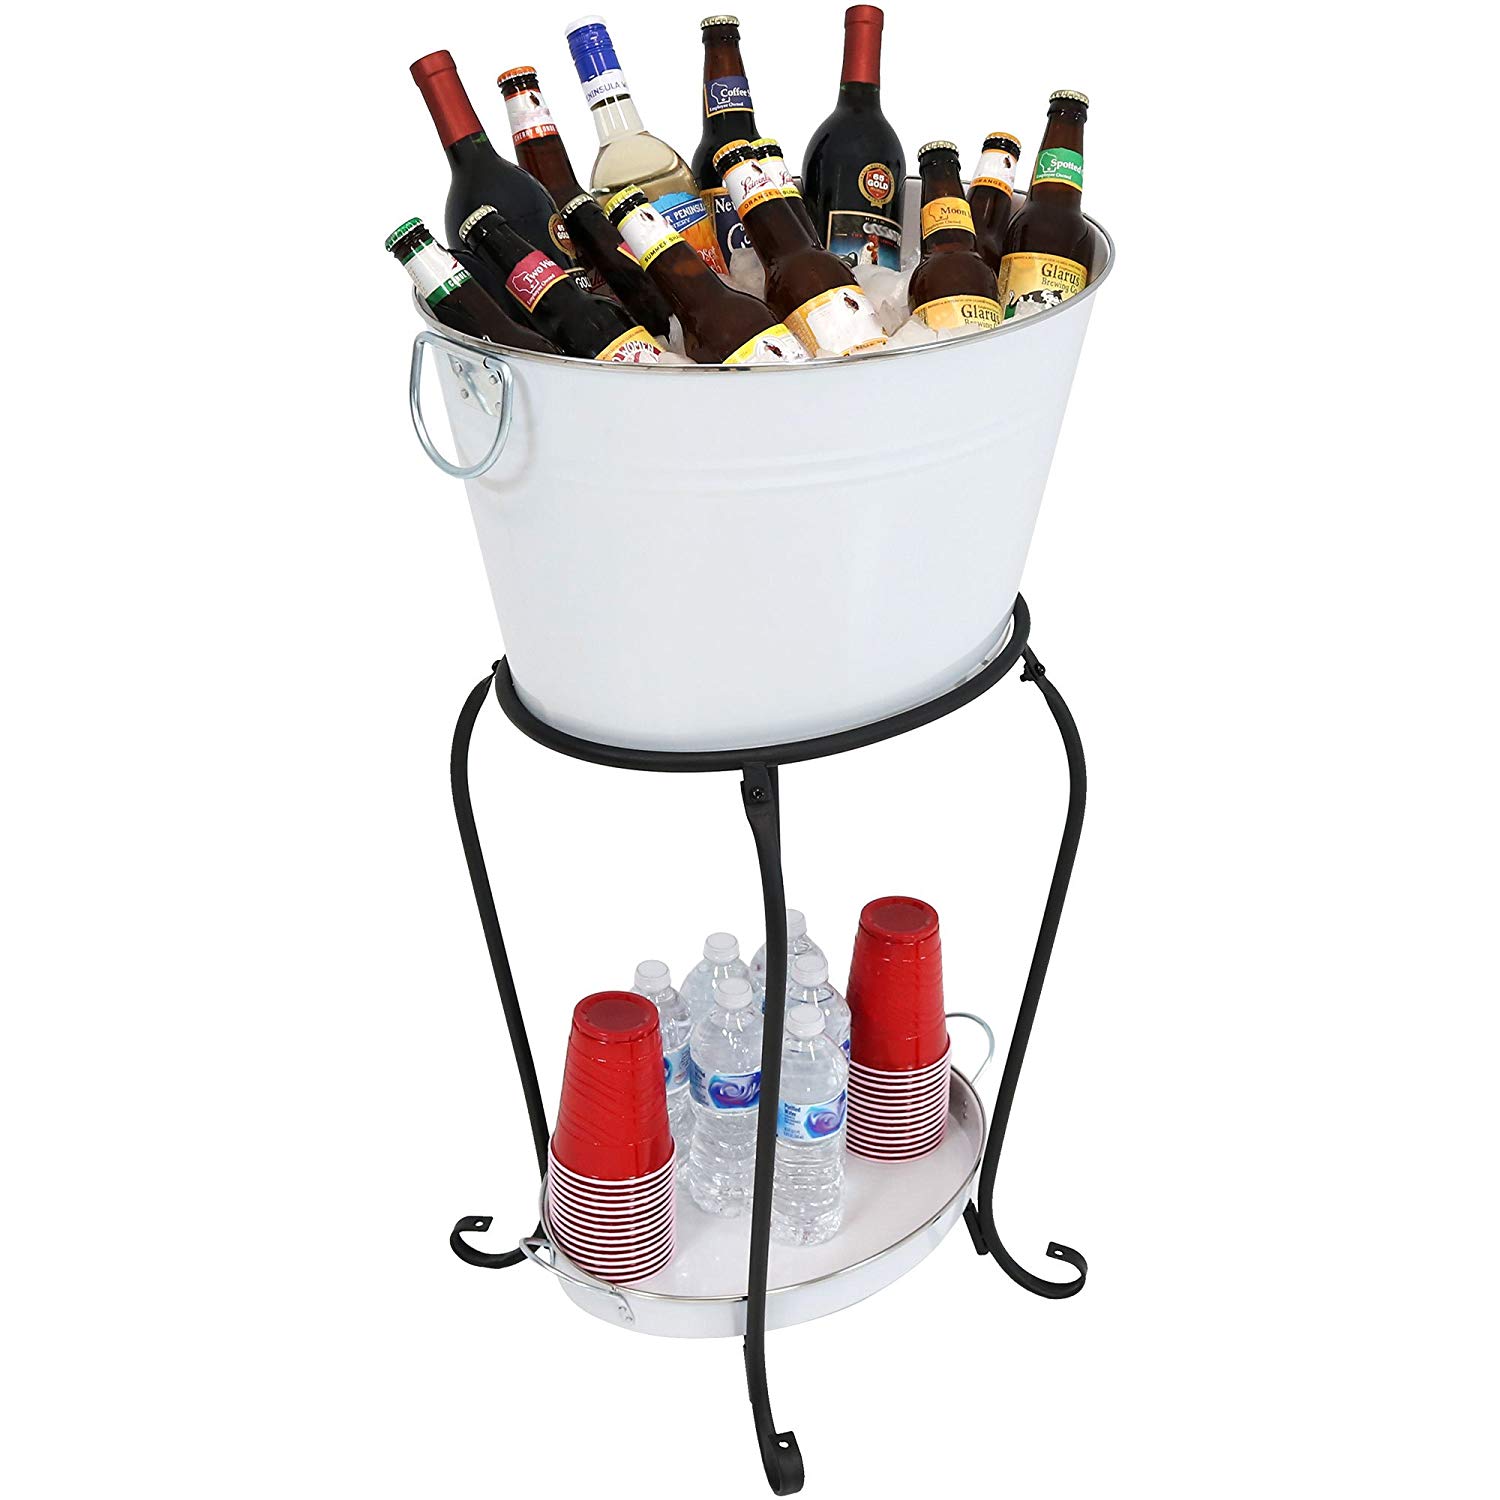 White Finish Beverage beer wine Holder with Stand and Tray for Parties